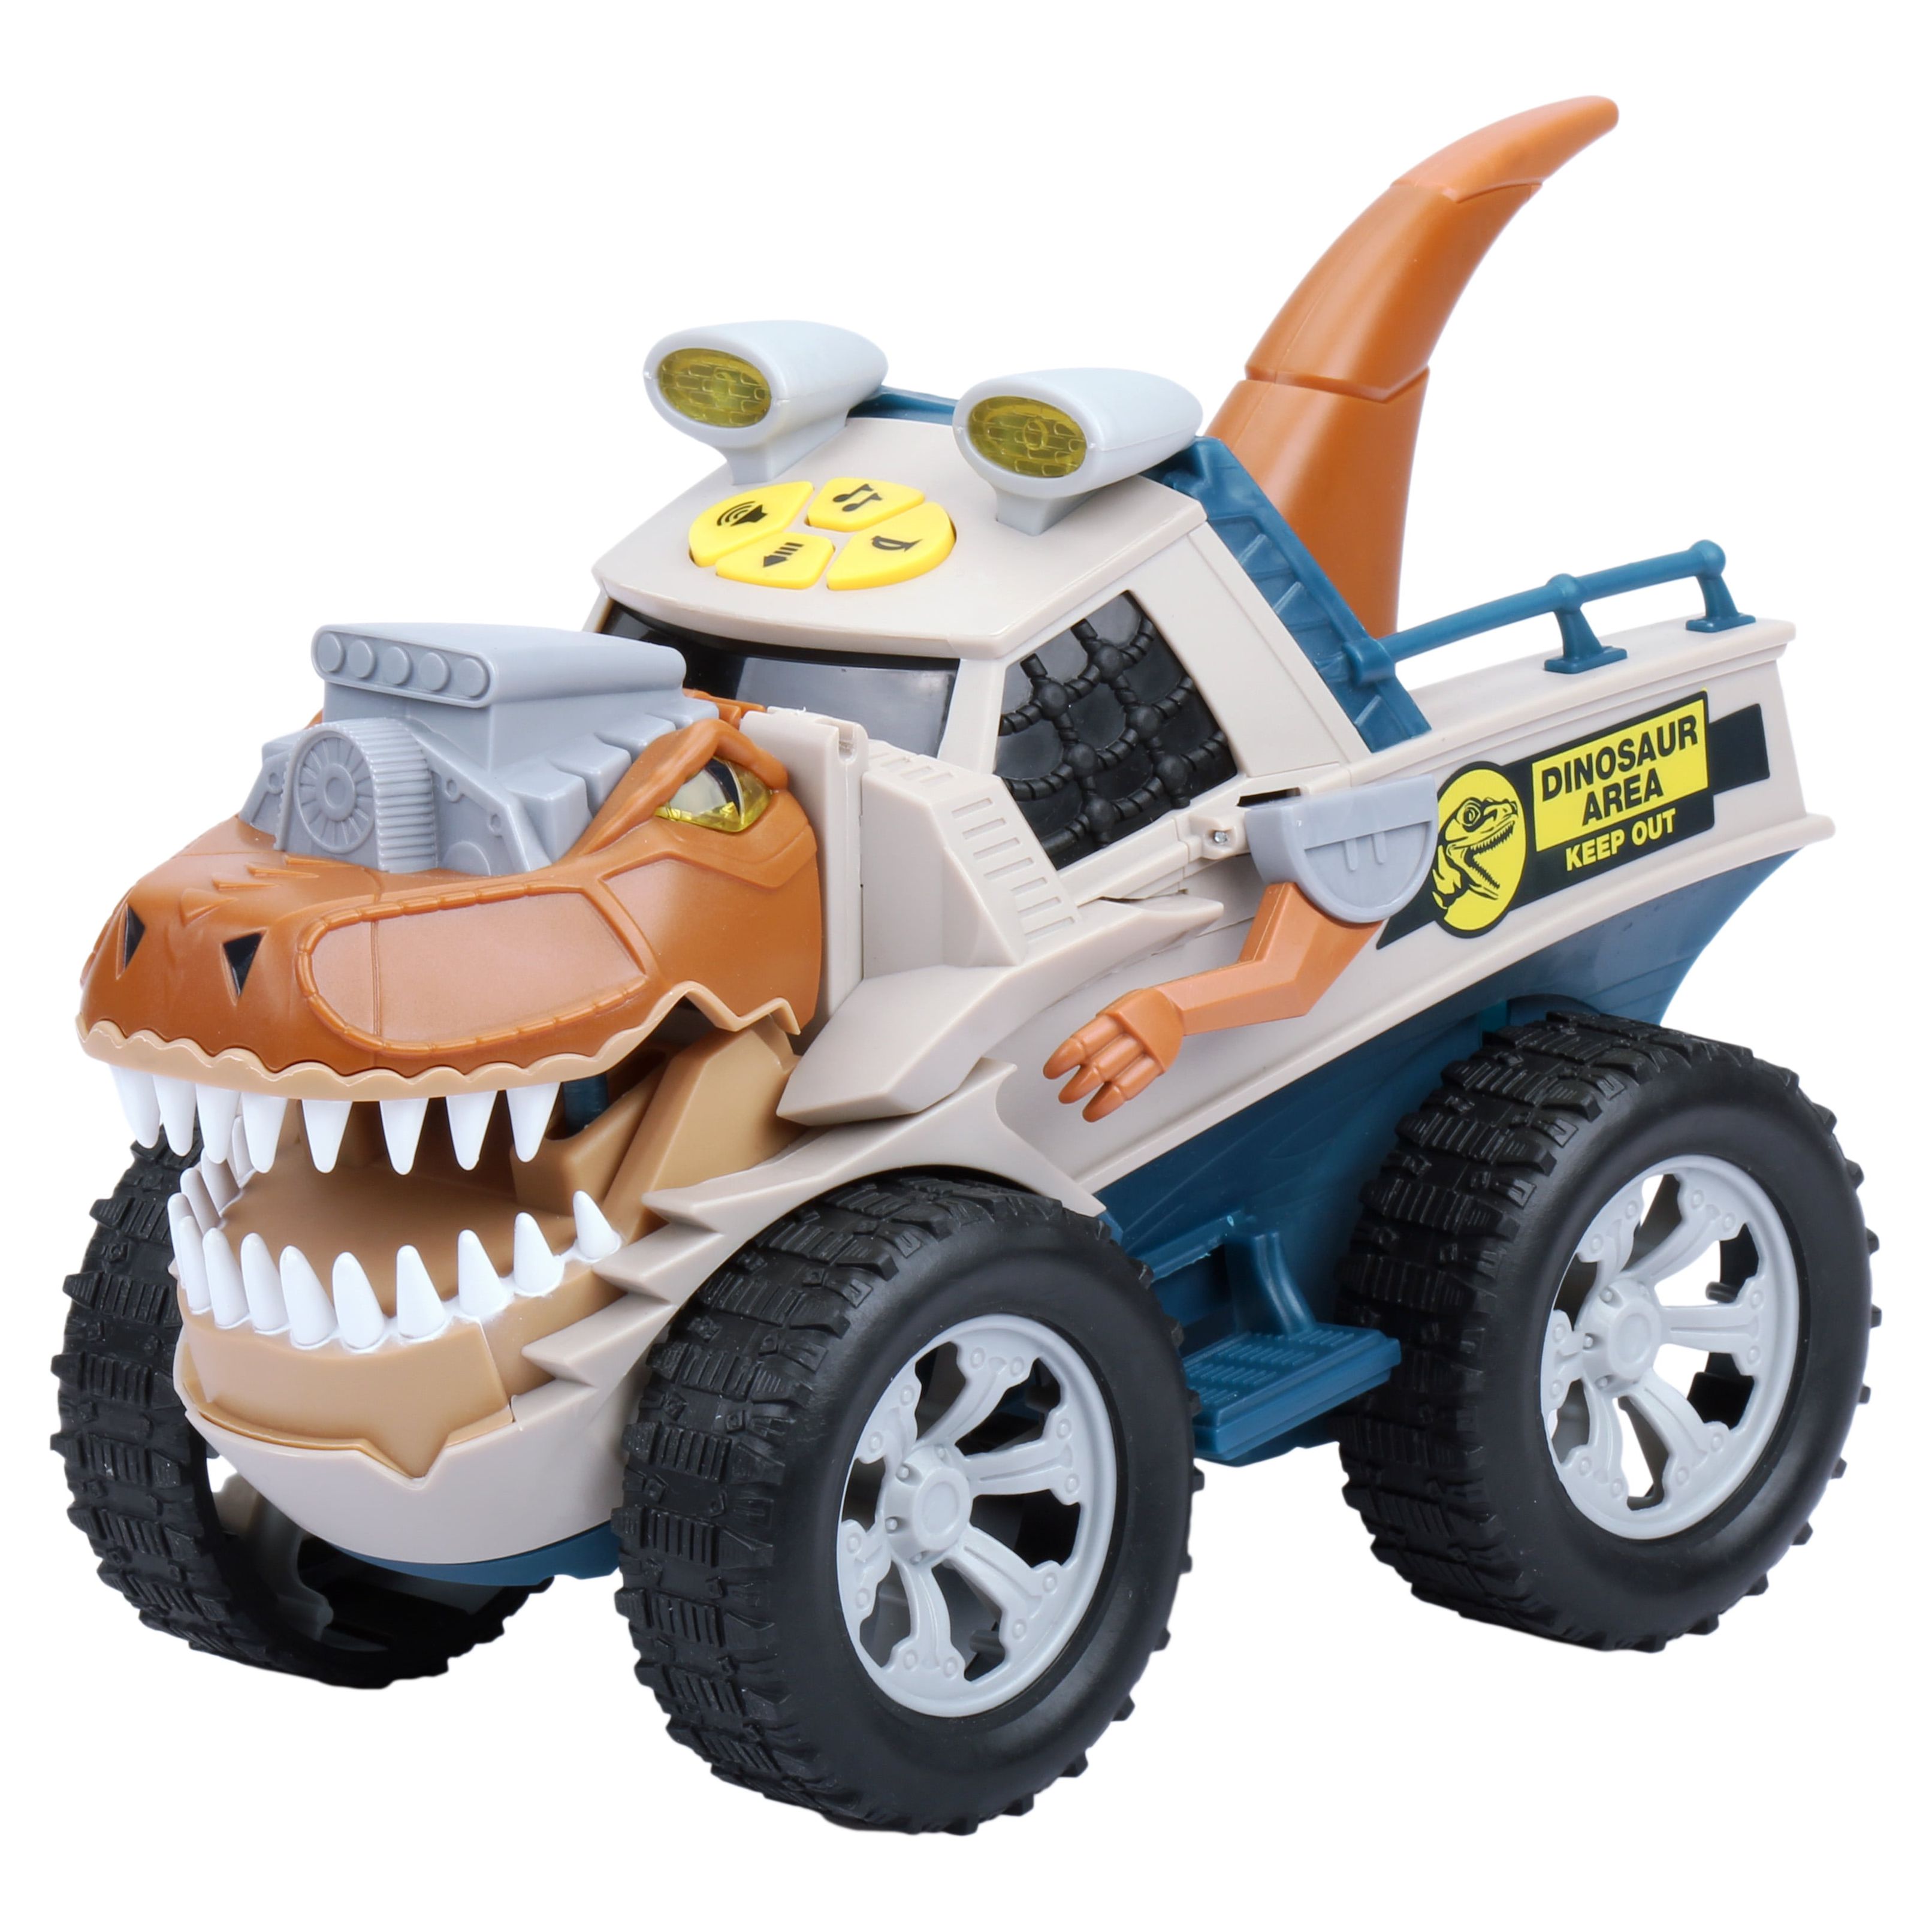 Adventure Force Jawesome Jammer Motorized Lights & Sounds Brown Dino Vehicle - image 1 of 5